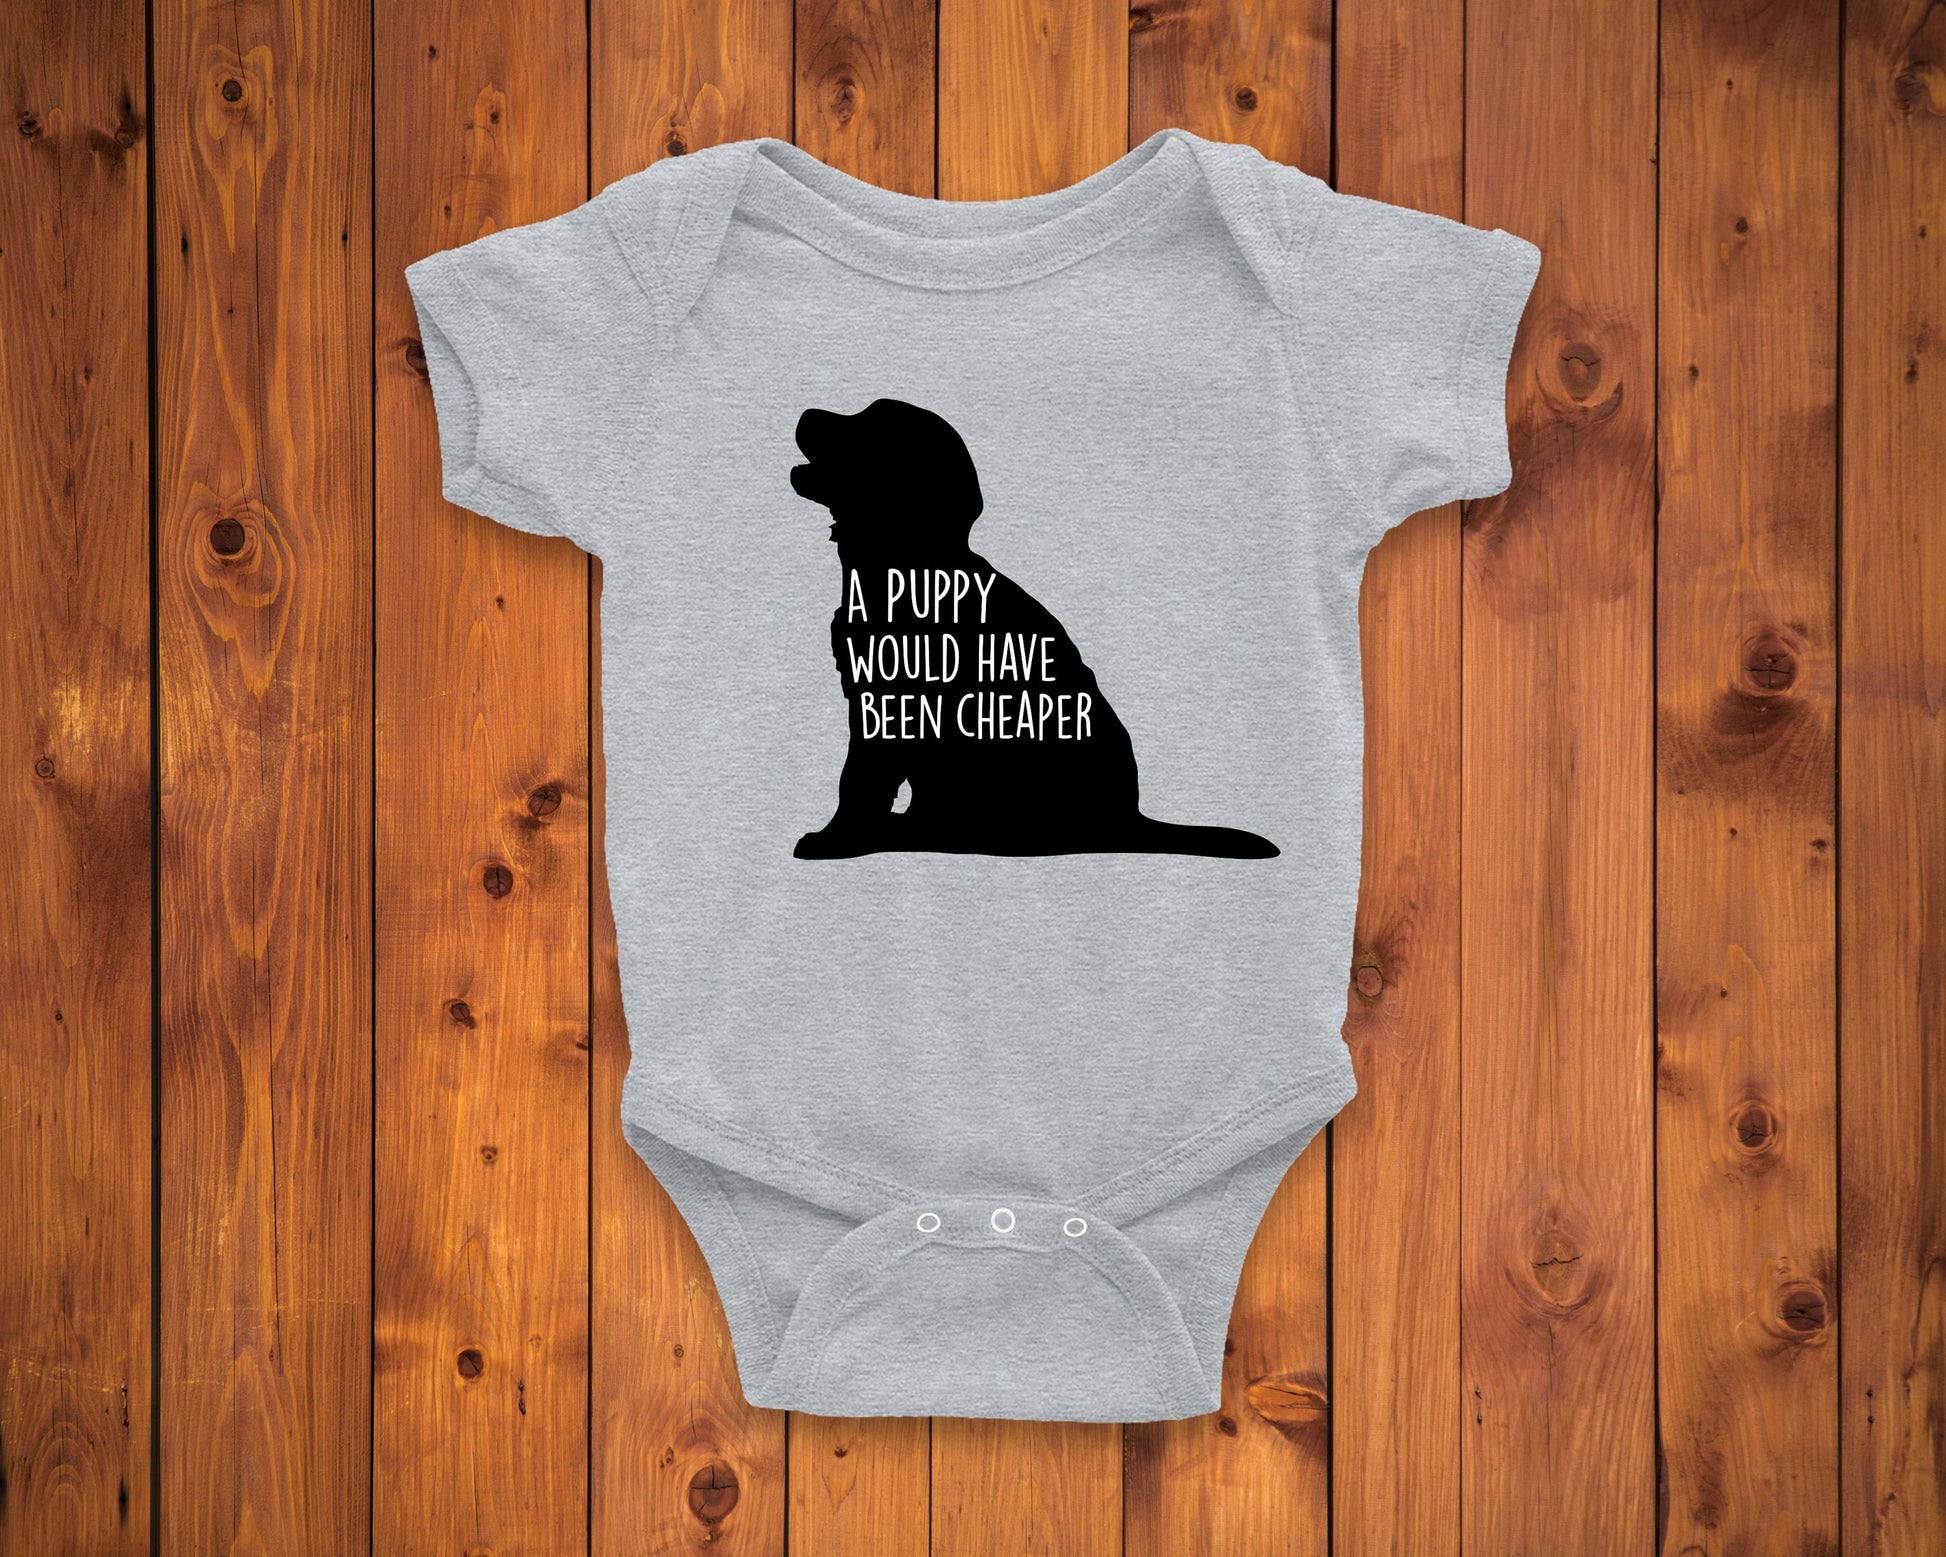 A Puppy Would Have Been Cheaper Infant or Kids Shirt or Bodysuit - funny baby gift - baby shower gifts - new baby gift - baby announcement